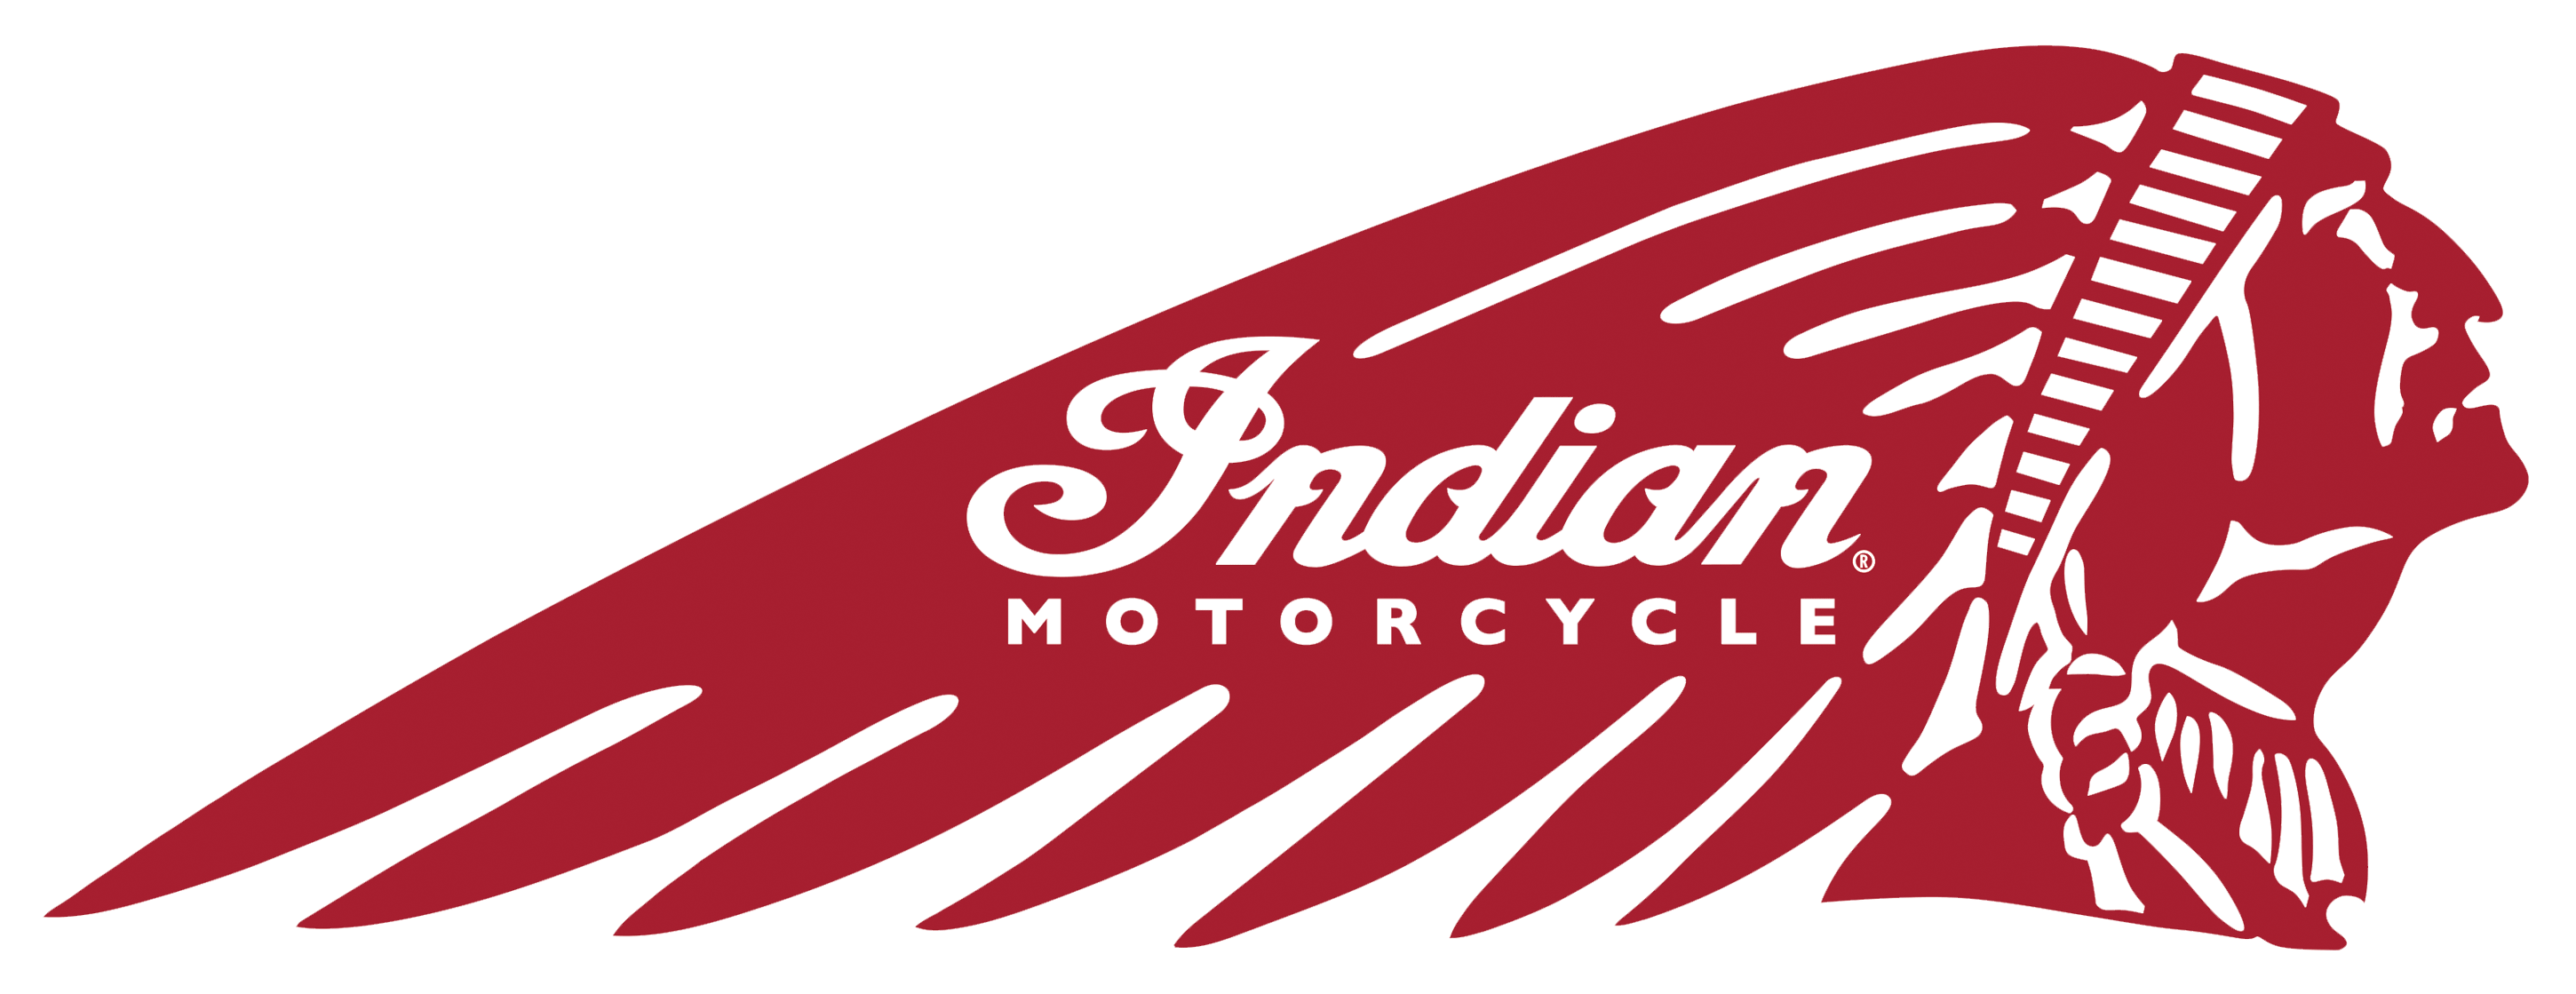 Rotate & Resize Tool: indian motorcycle logo vector